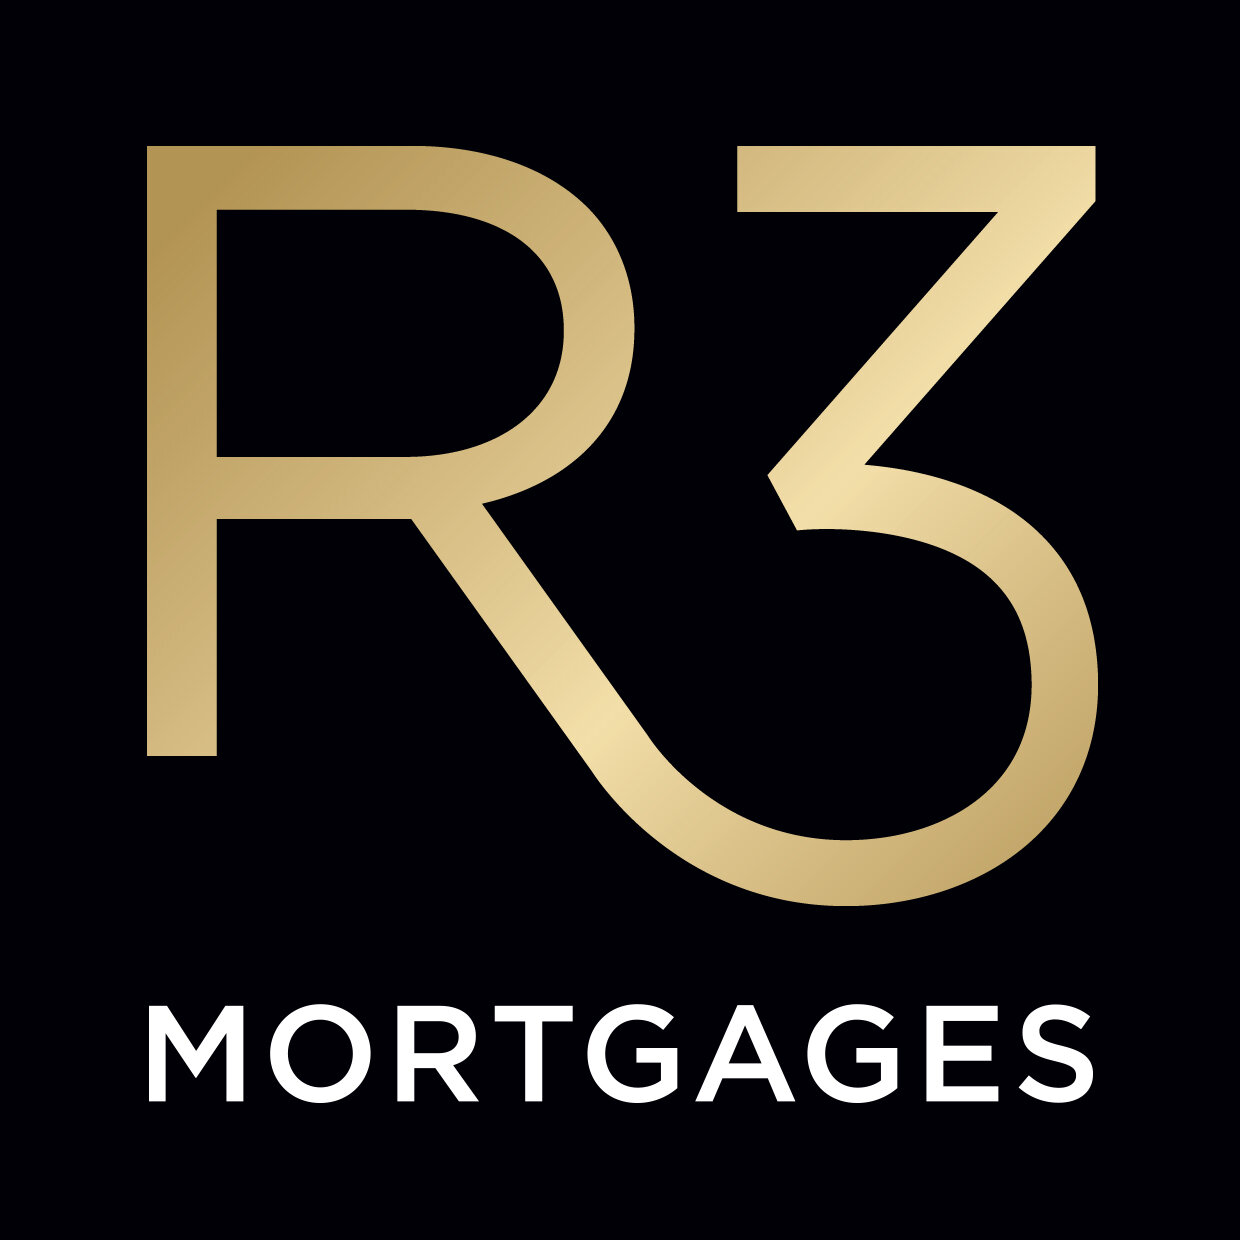 About Us R3 Mortgages